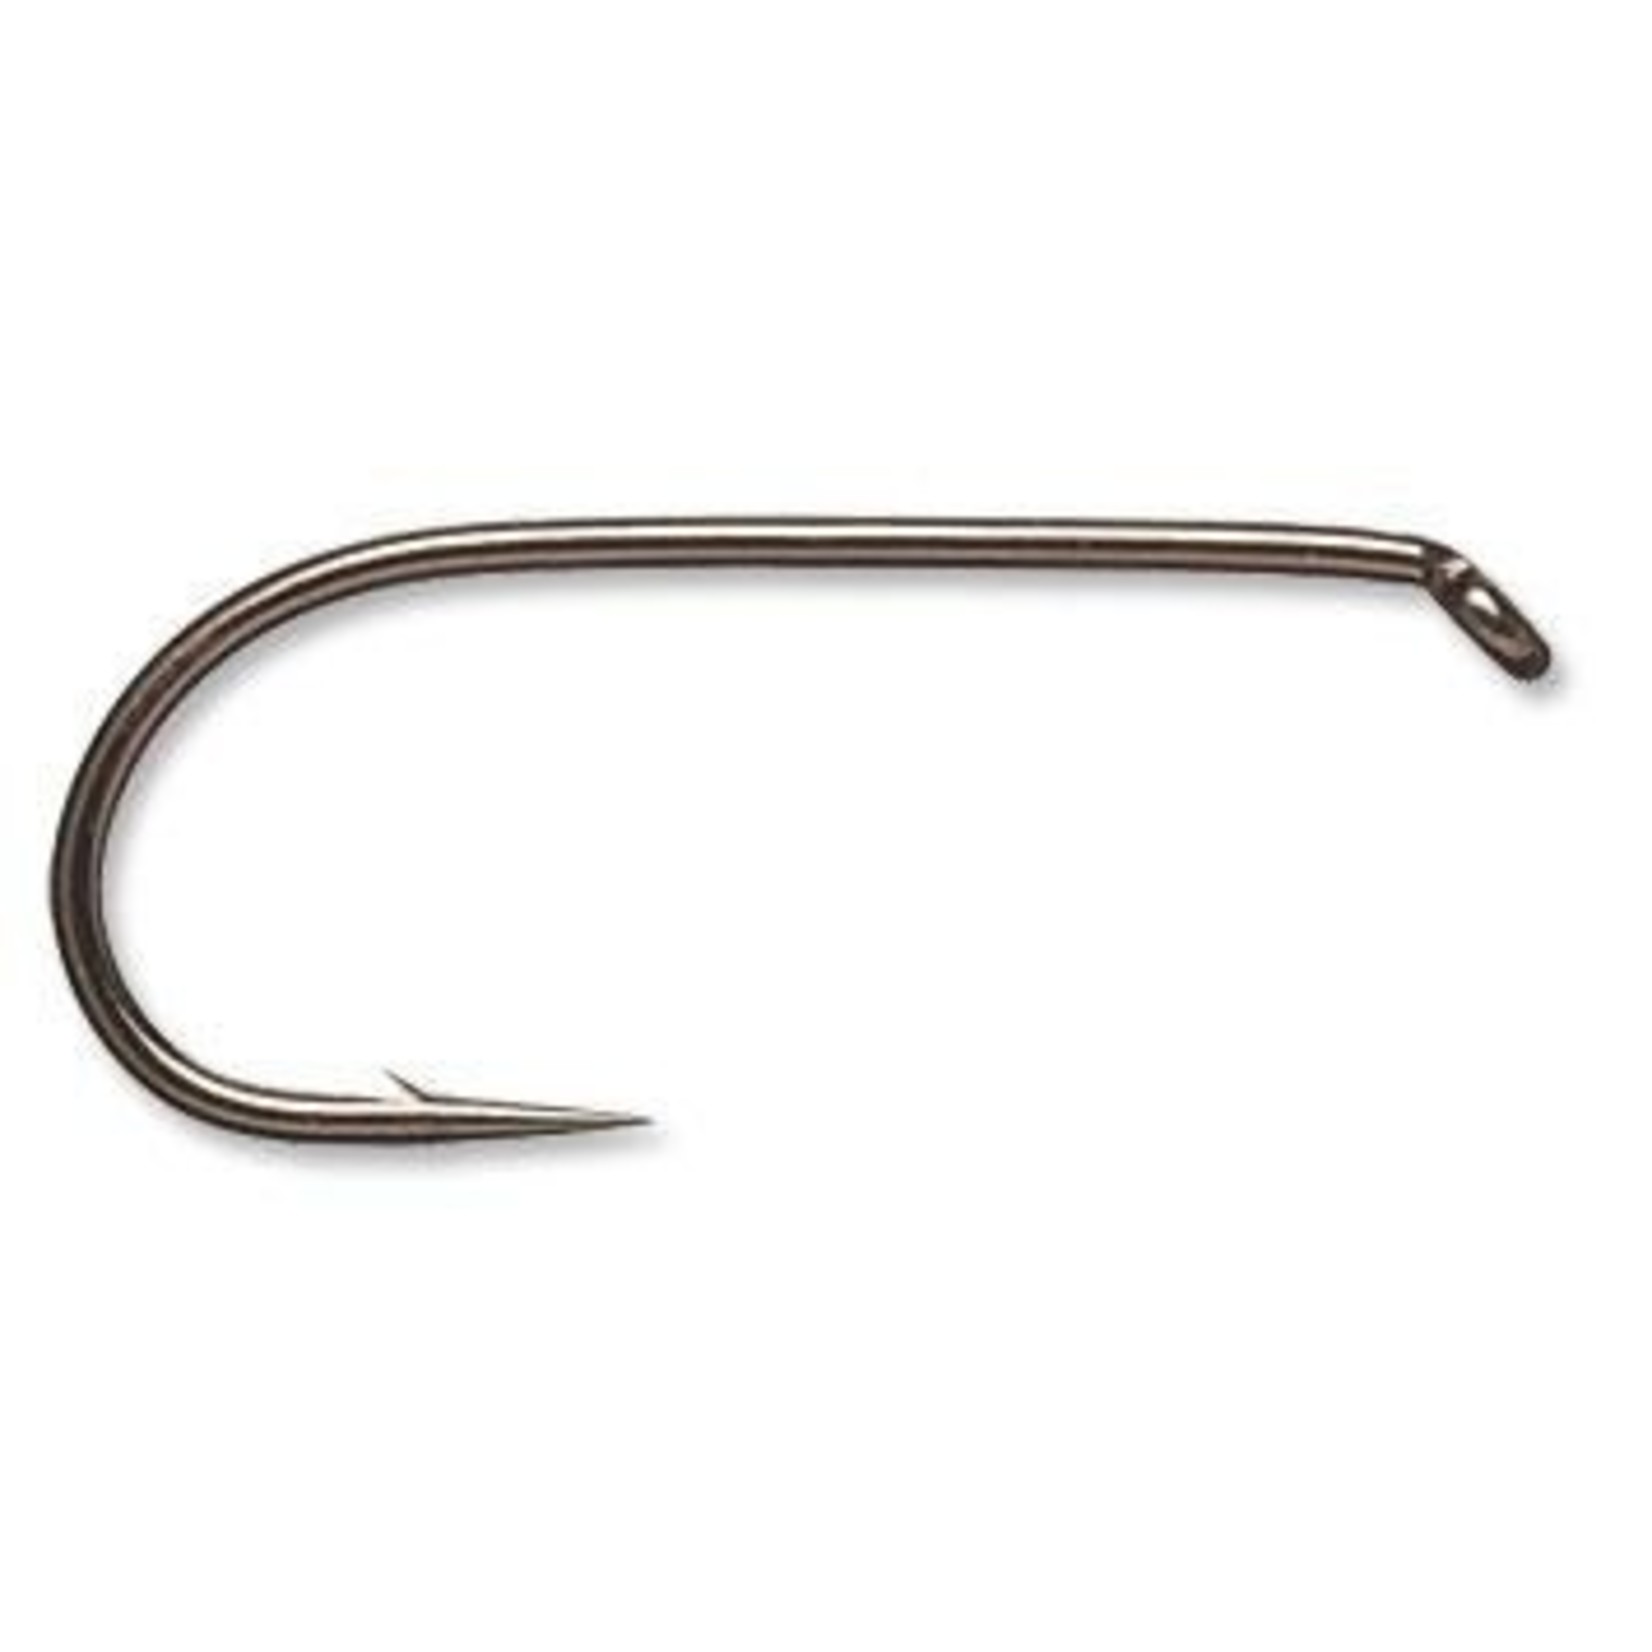 Orvis Extra-Fine Dry Fly Hook